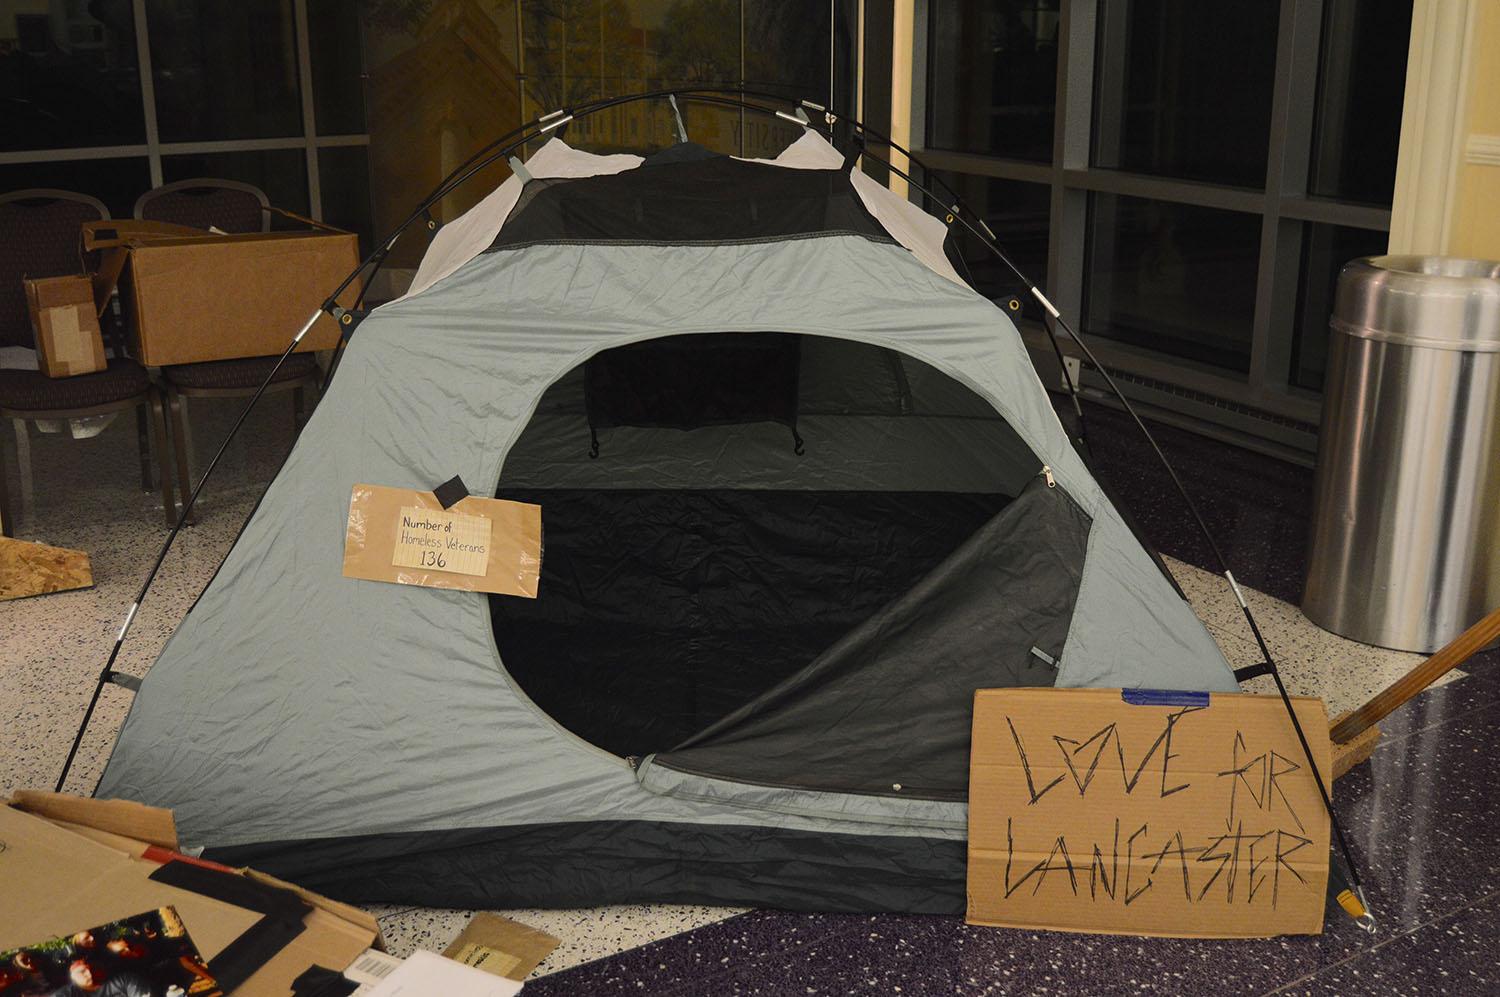 The+TCU+Wesley+Foundation+educates+students+on+campus+during+Homelessness+Awareness+Week.